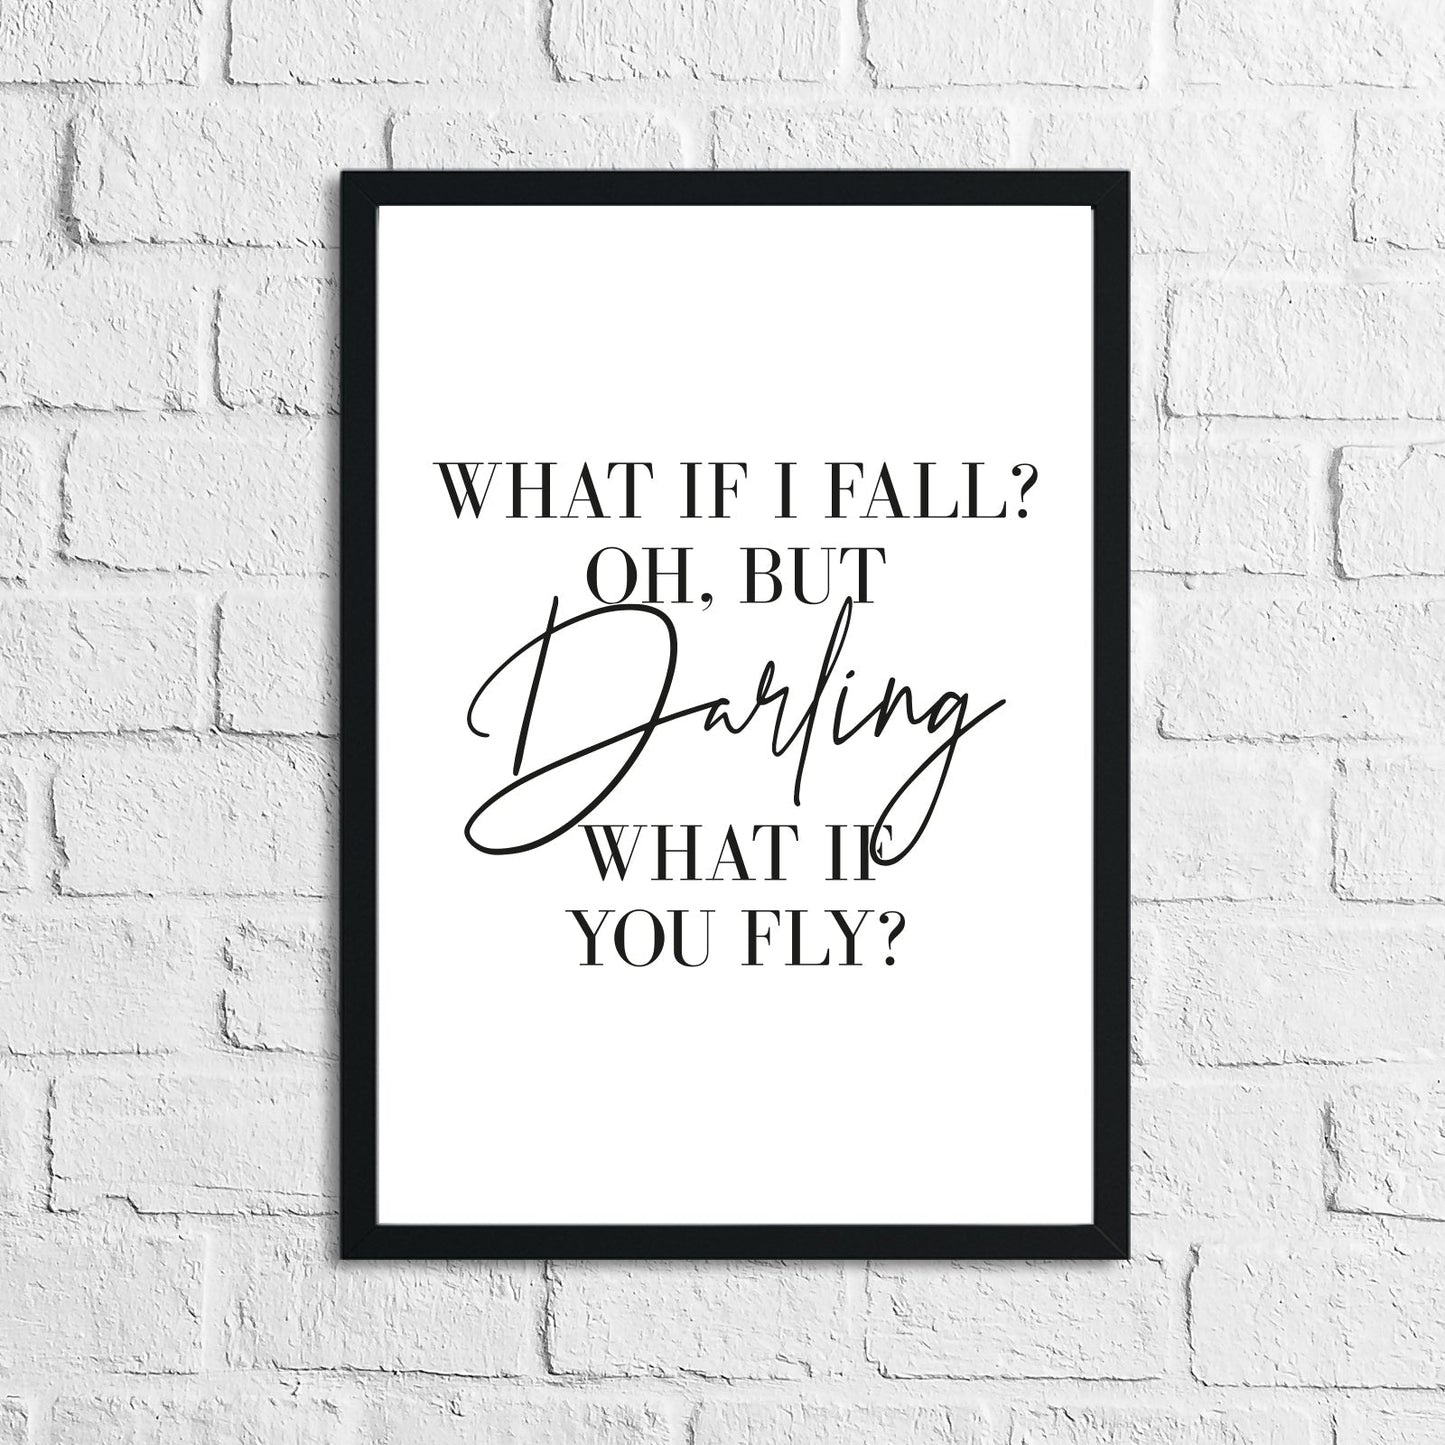 What If I Fall? Oh, But Darling What If You Fly? Inspirational Wall Decor Quote Print (Get it fast)